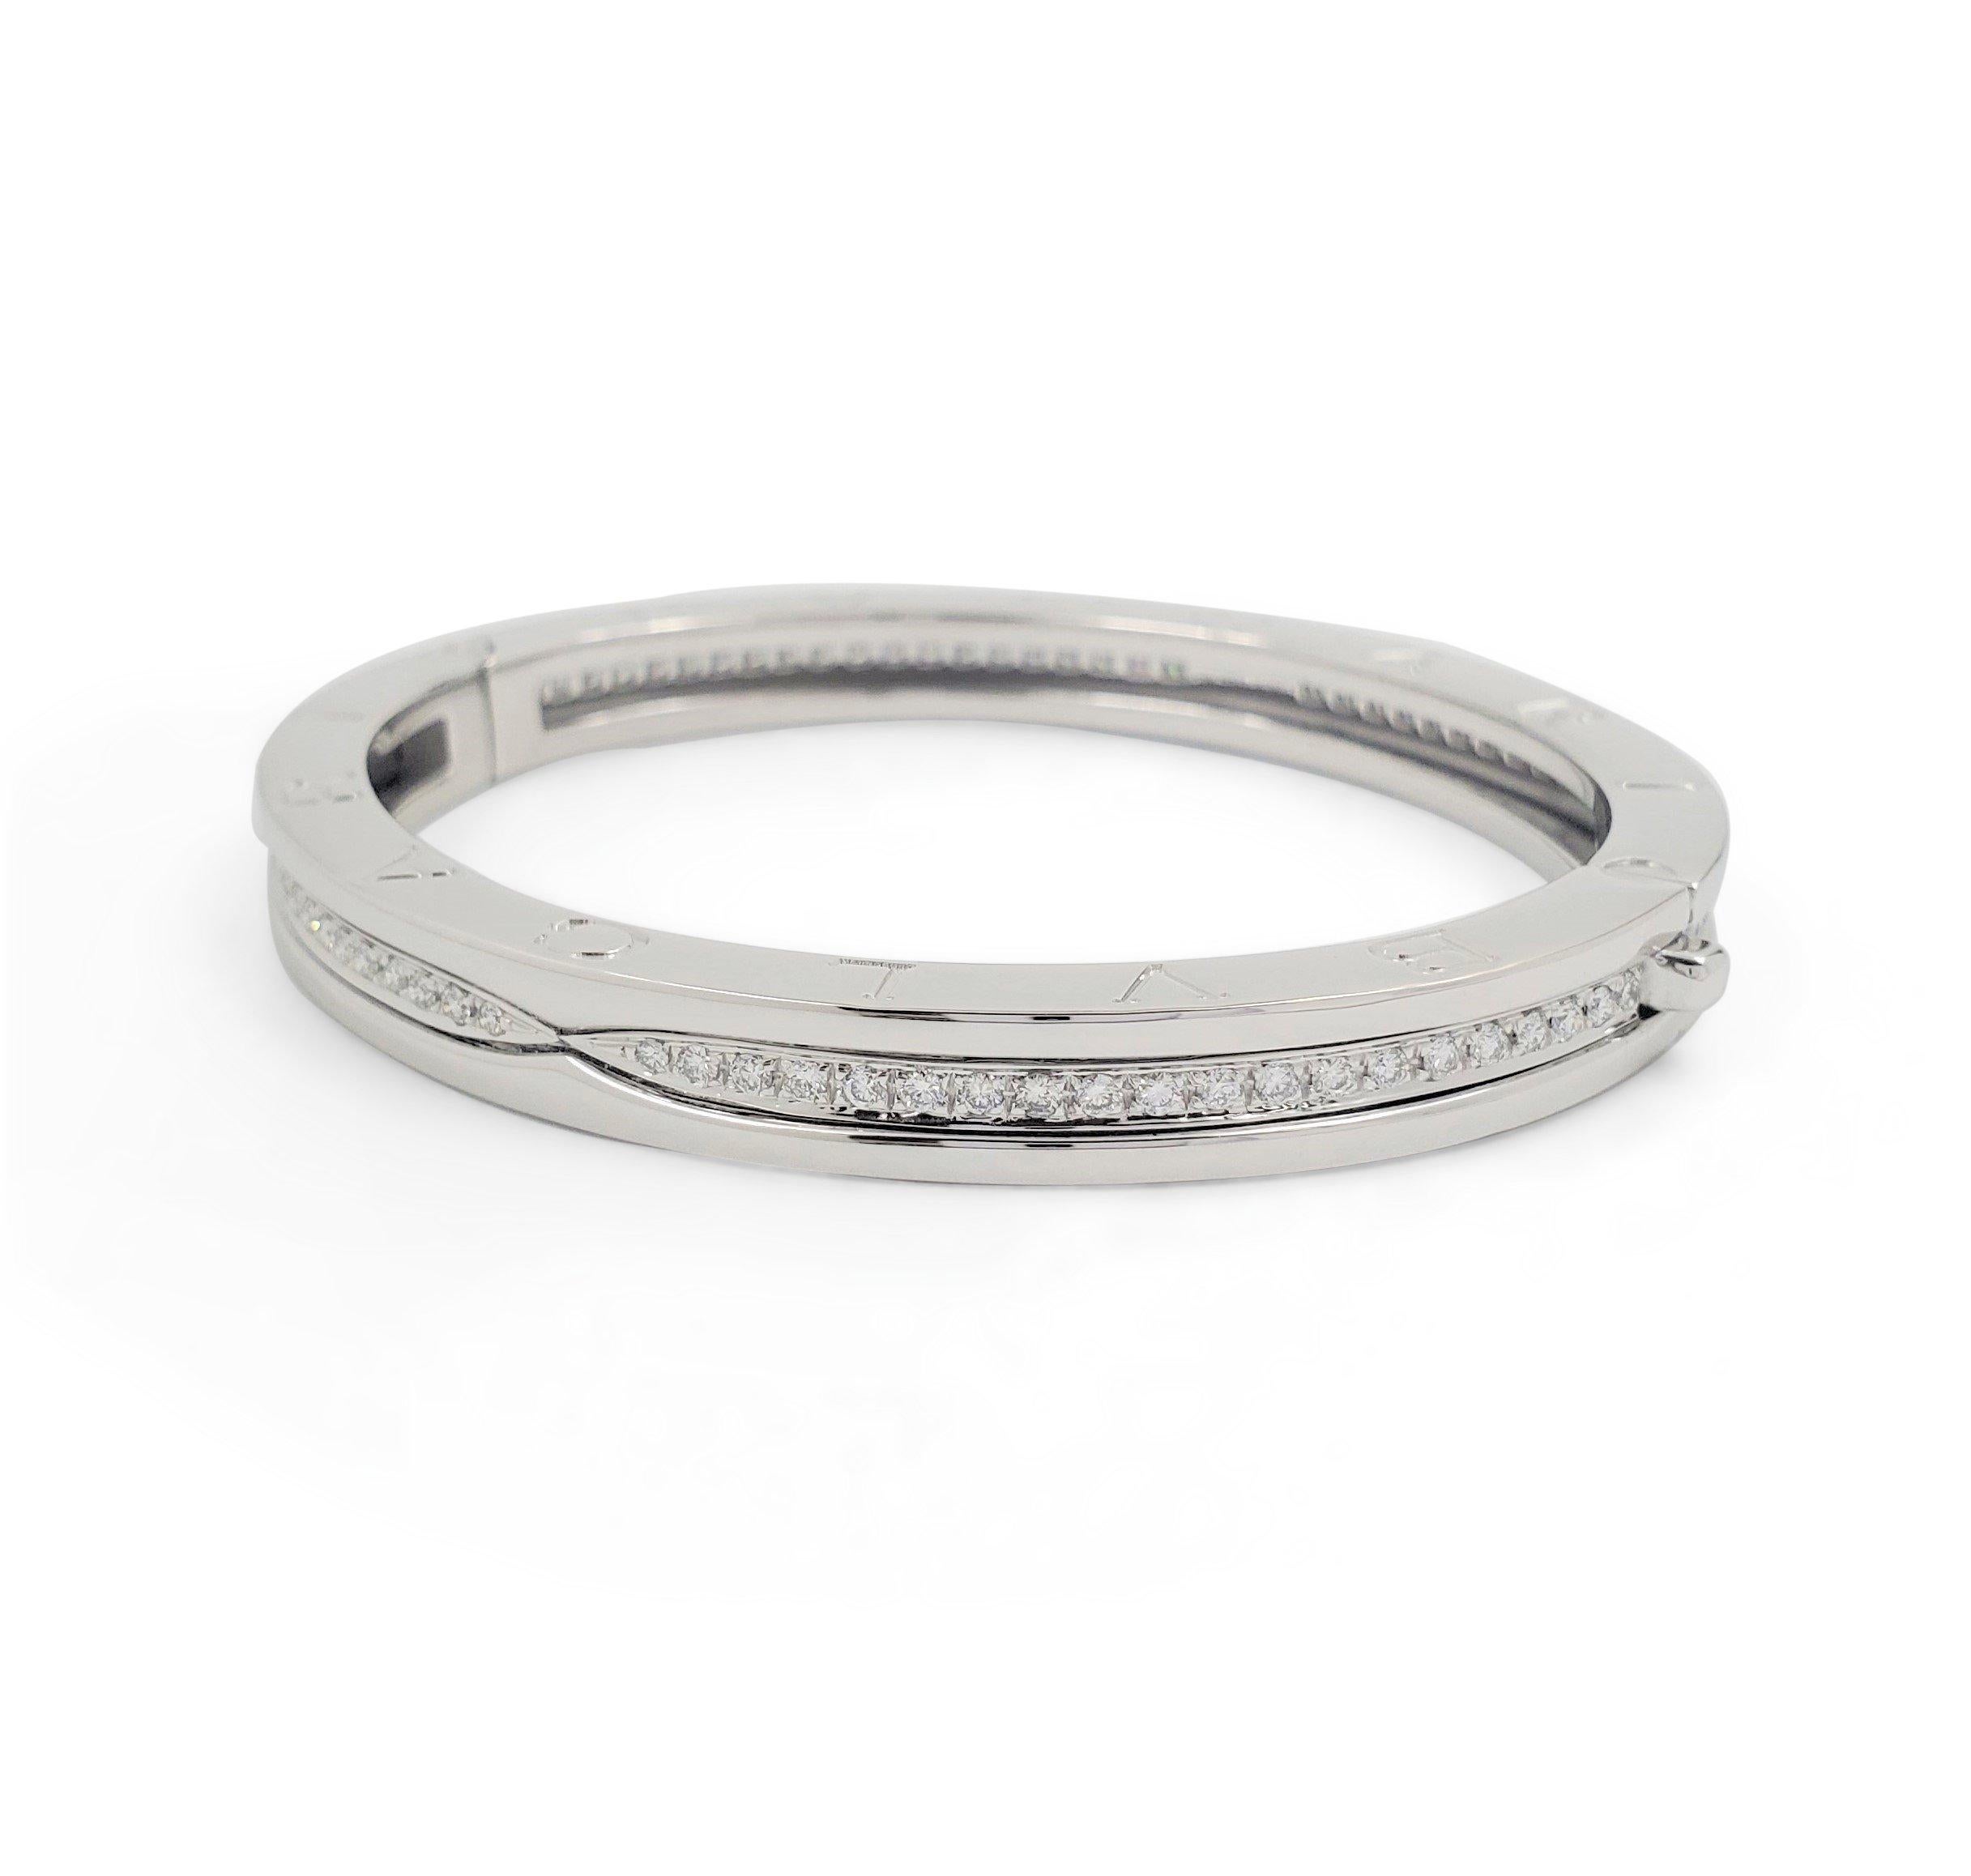 Authentic Bvlgari 'B.Zero1' bracelet crafted in 18 karat white gold engraved with the Bvlgari logo on both sides. The bracelet has a high polished lip of gold on either side and a center strip pave set with approximately 84 round brilliant cut